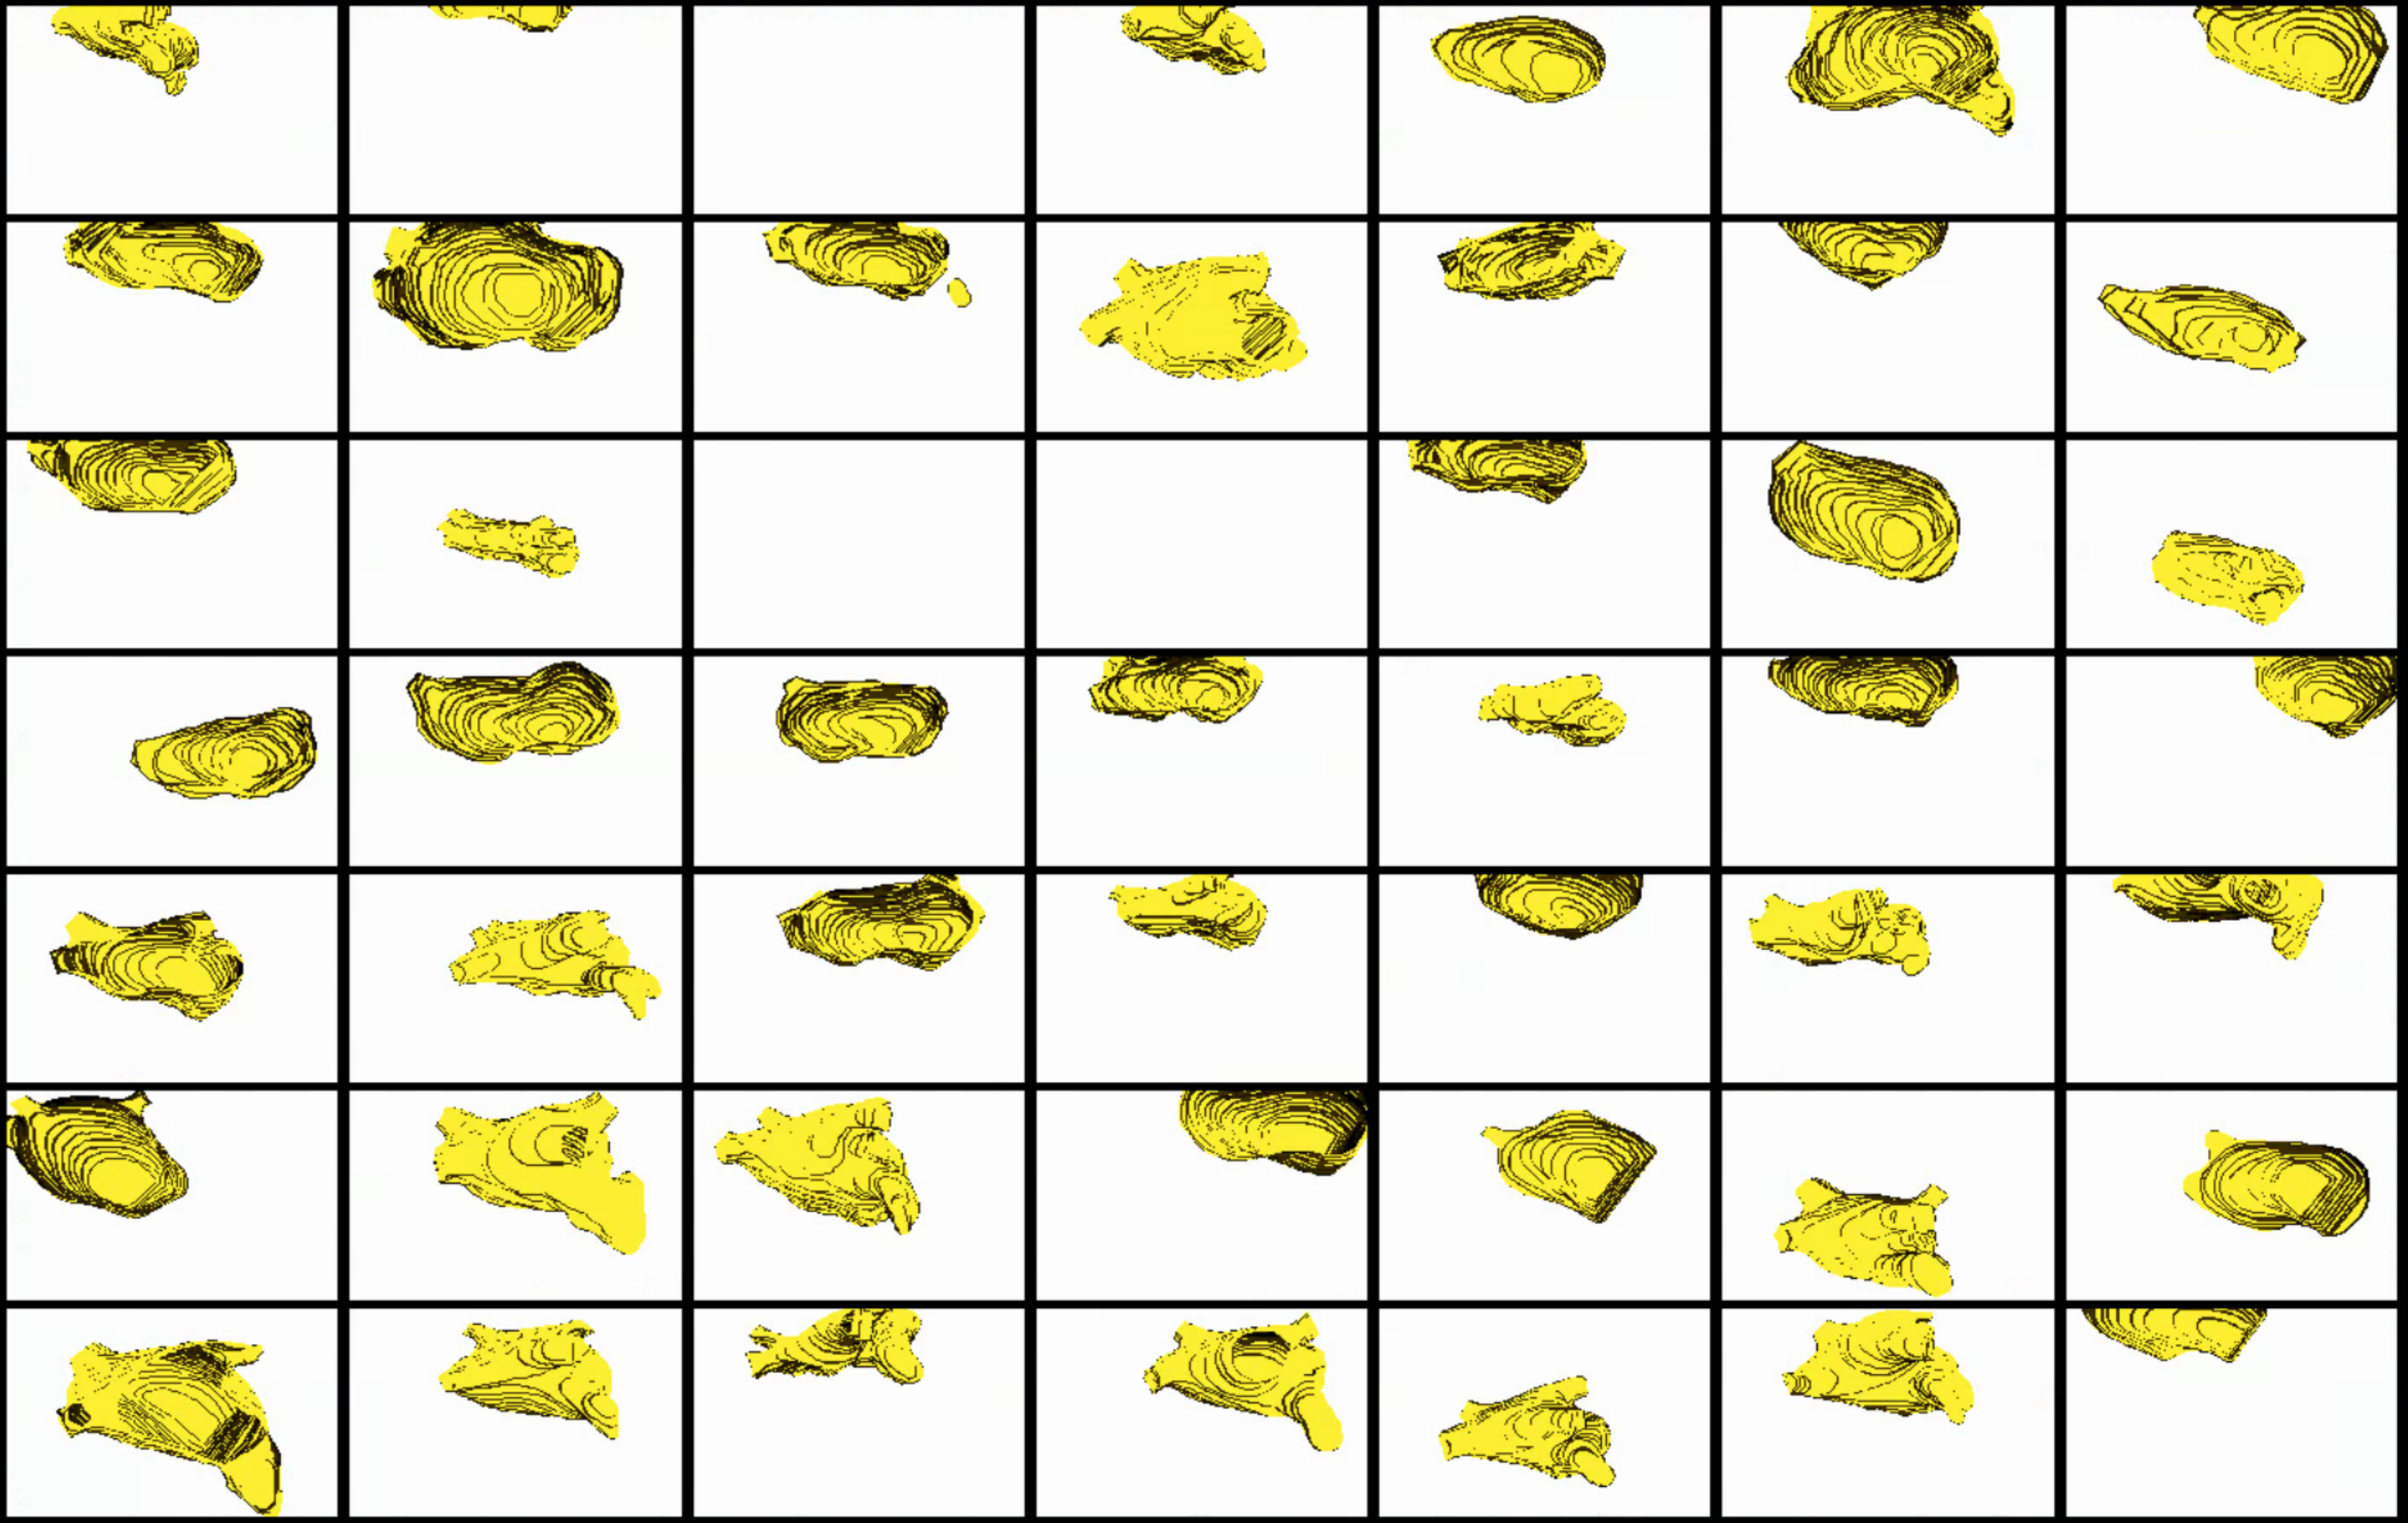 This is how the segmentations in the dataset look before grooming.